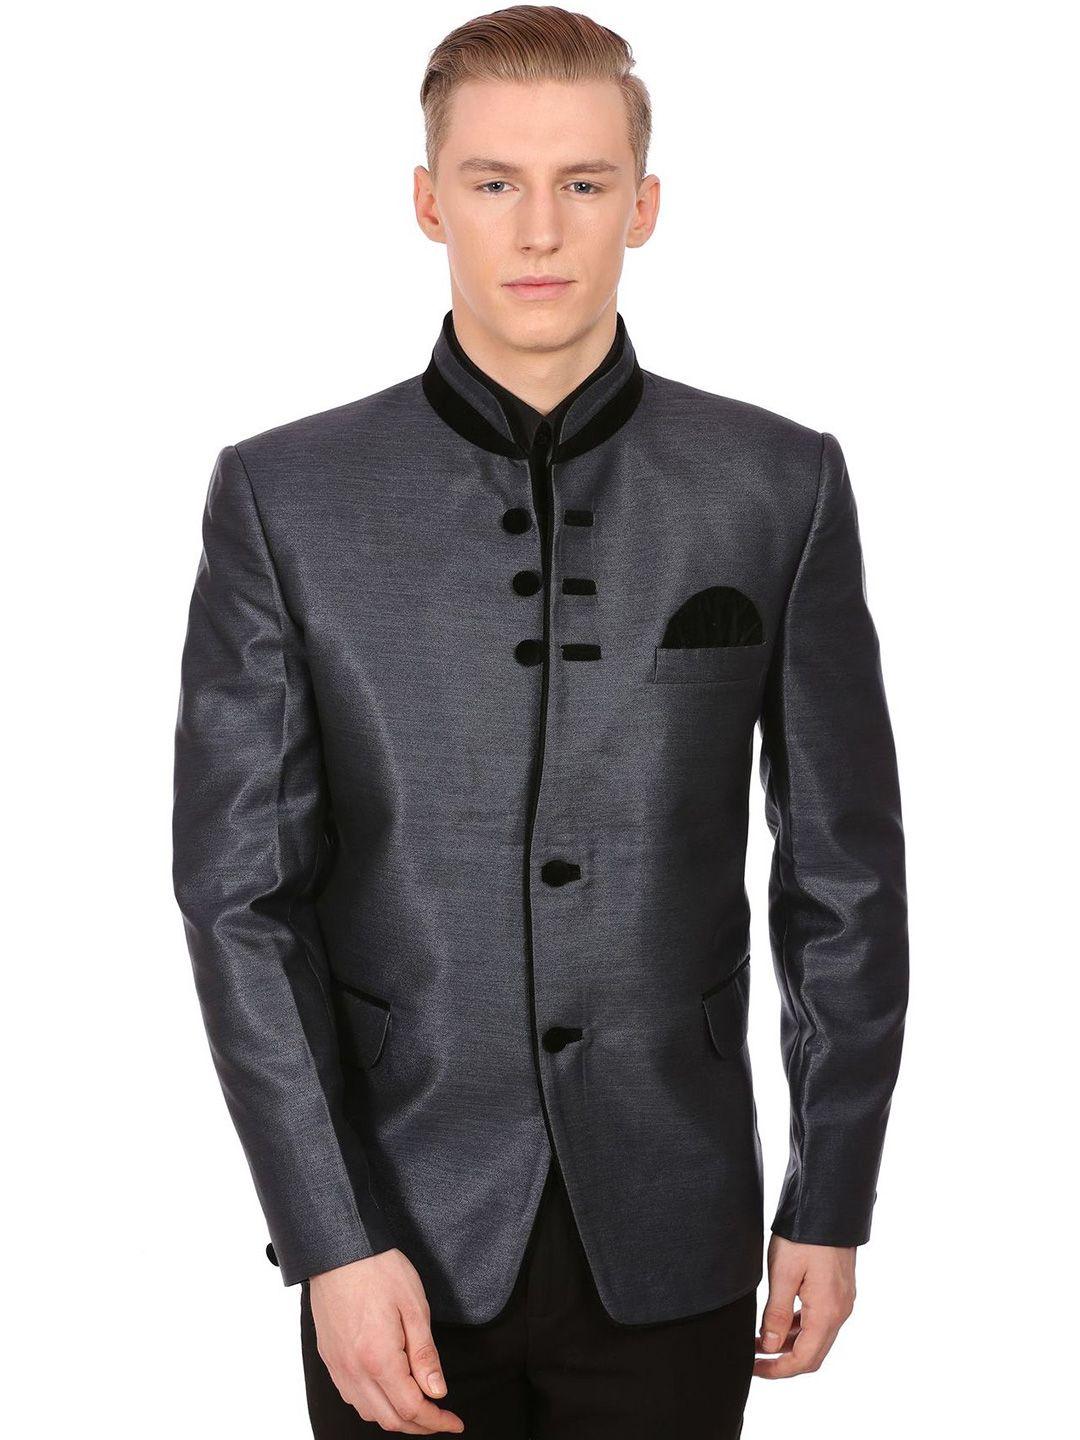 wintage-charcoal-grey-single-breasted-tailored-fit-ethnic-bandhgala-blazer